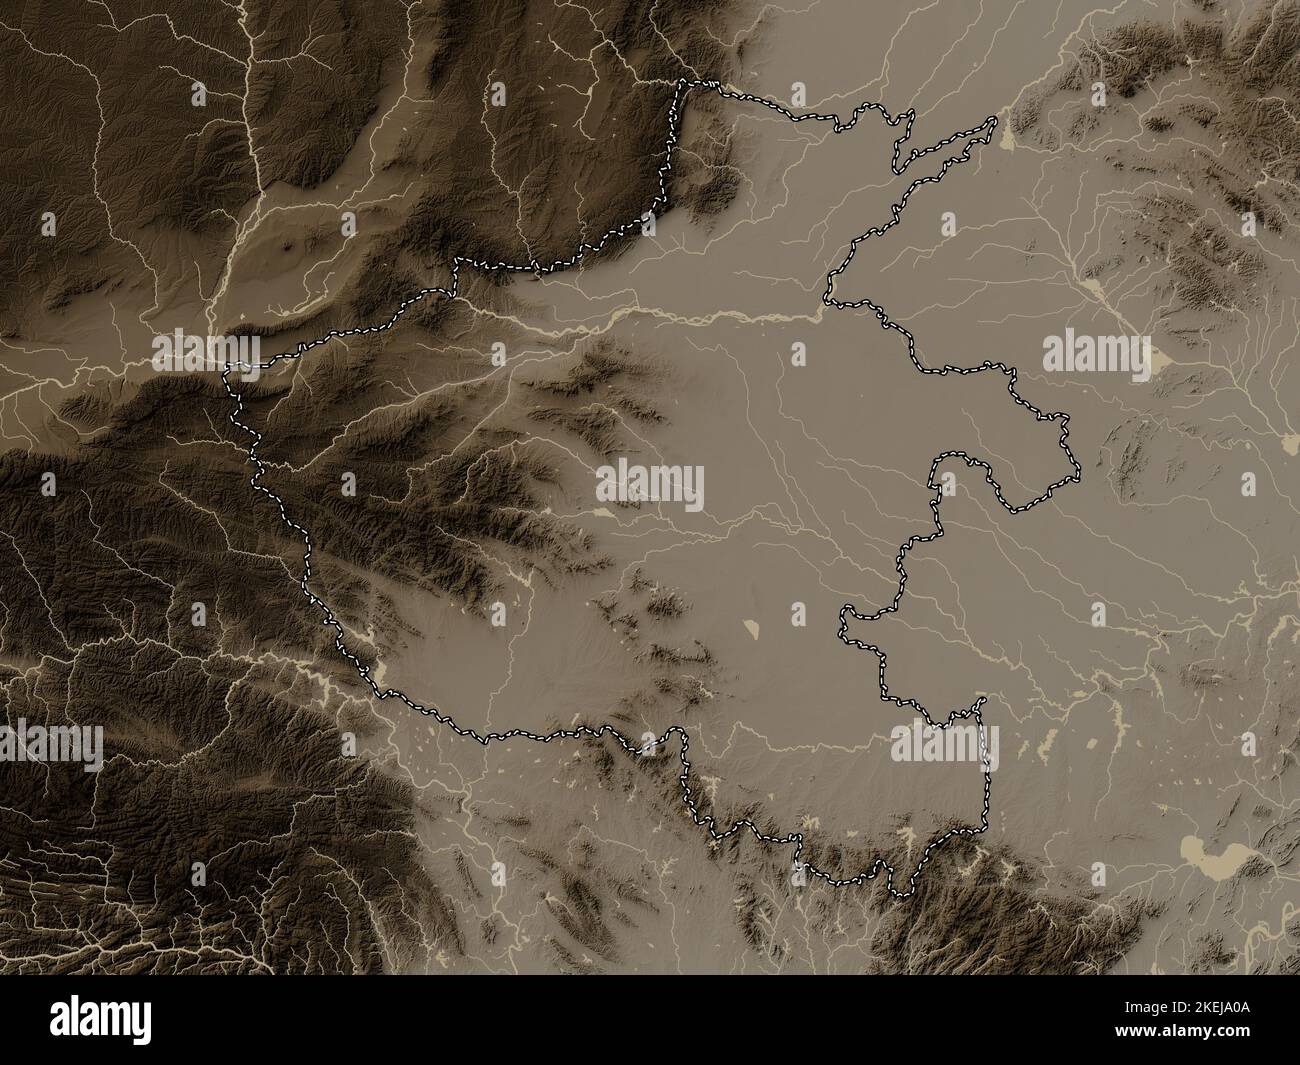 Henan, province of China. Elevation map colored in sepia tones with lakes and rivers Stock Photo